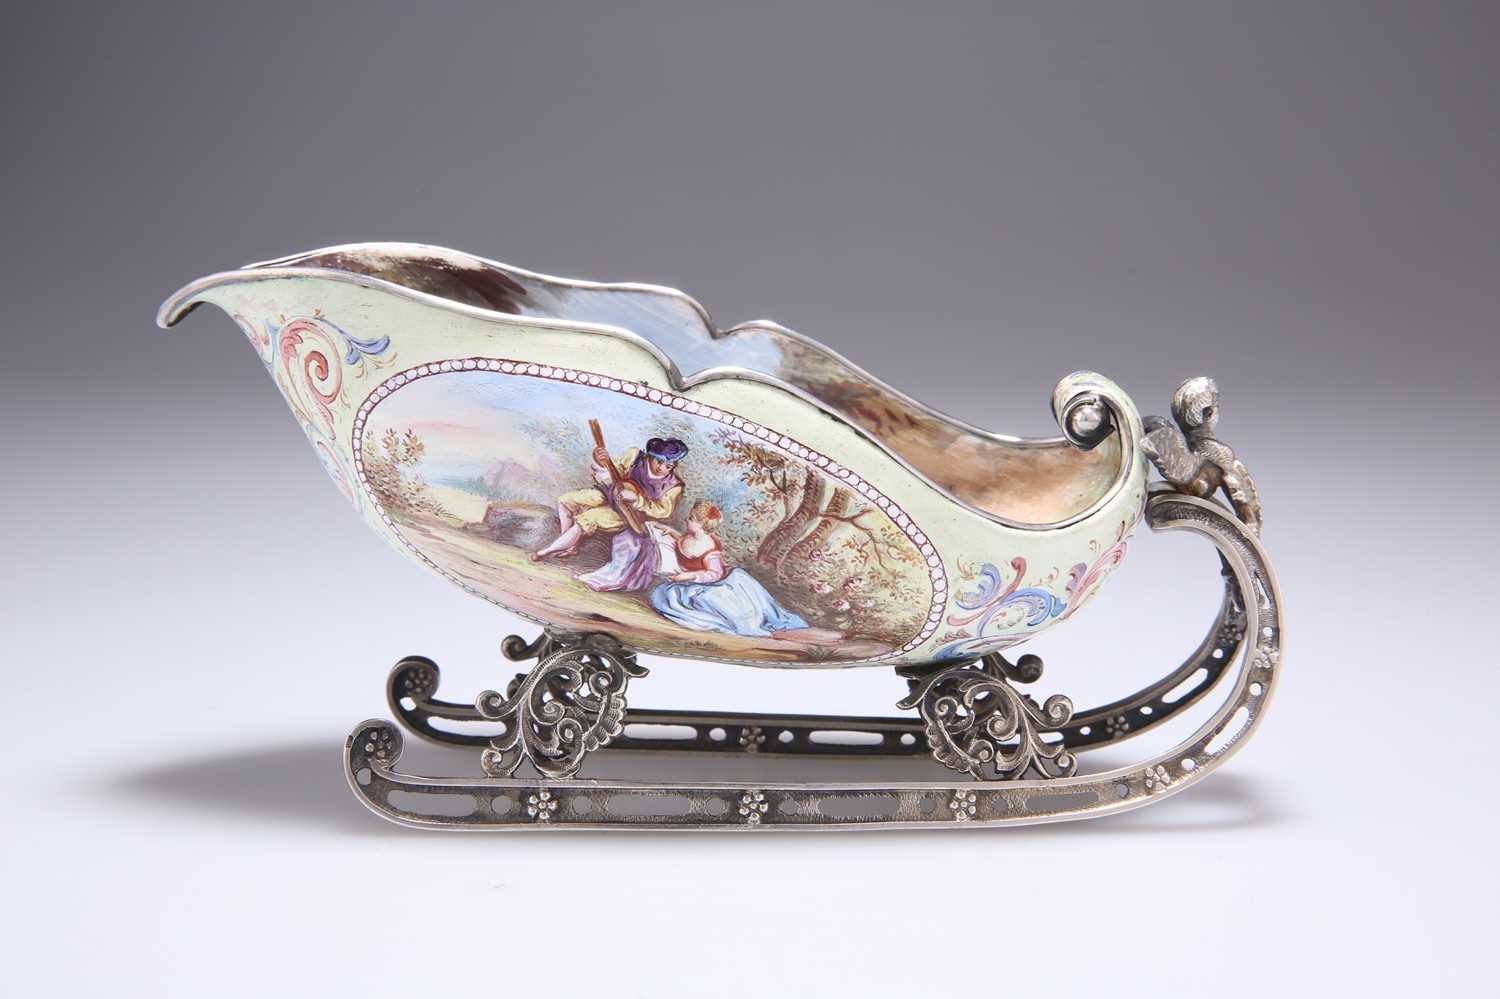 A VIENNESE ENAMEL AND SILVER MINIATURE SLEIGH - Image 2 of 5